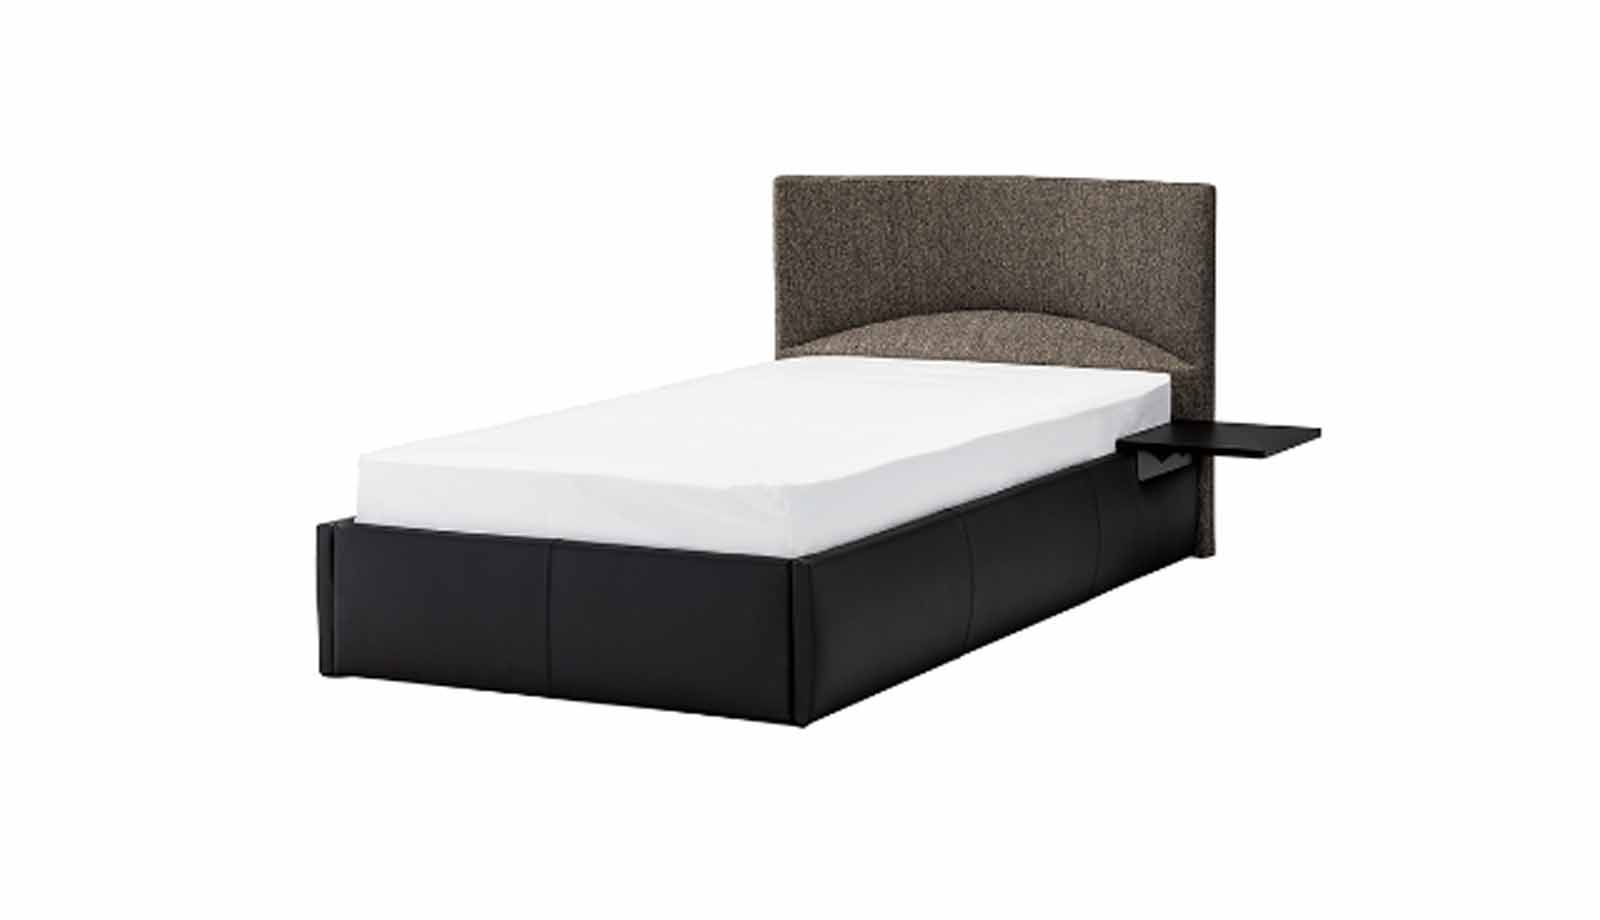 RATIOLETTO BED SYSTEM